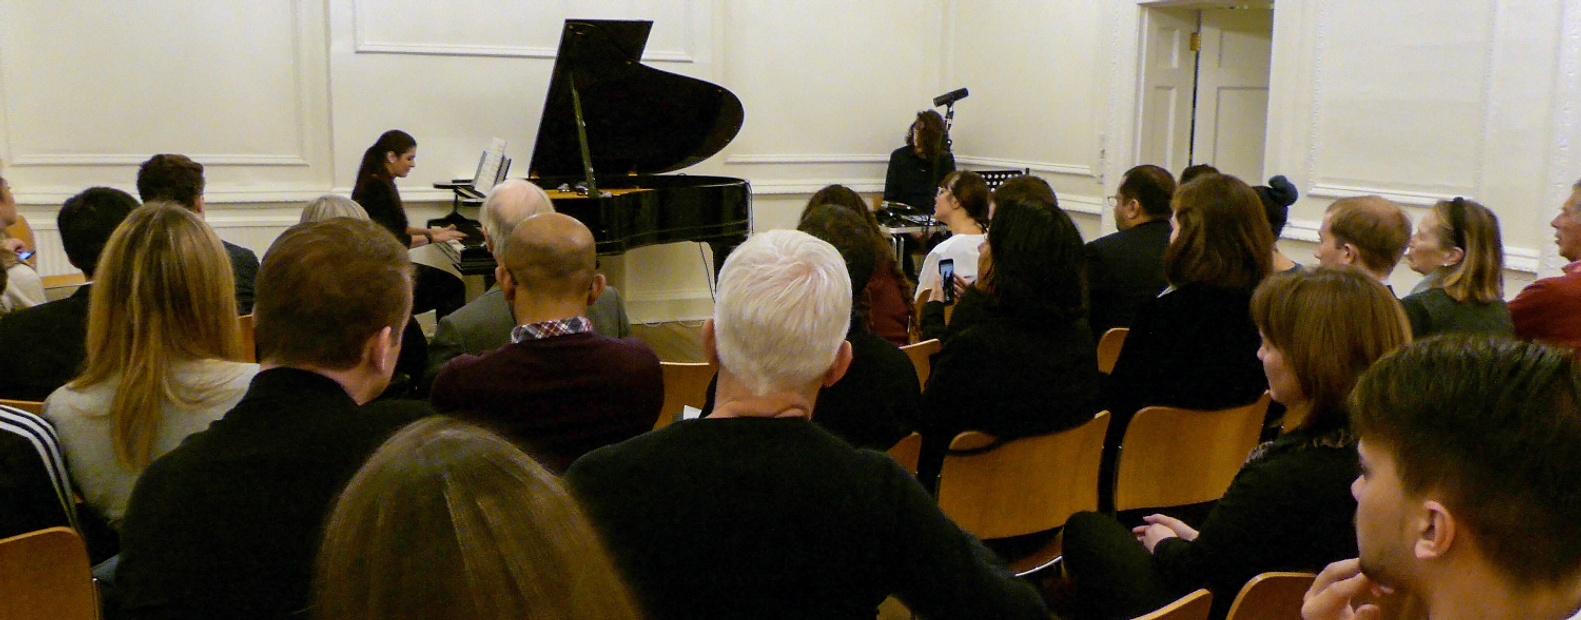 notting hill piano concert